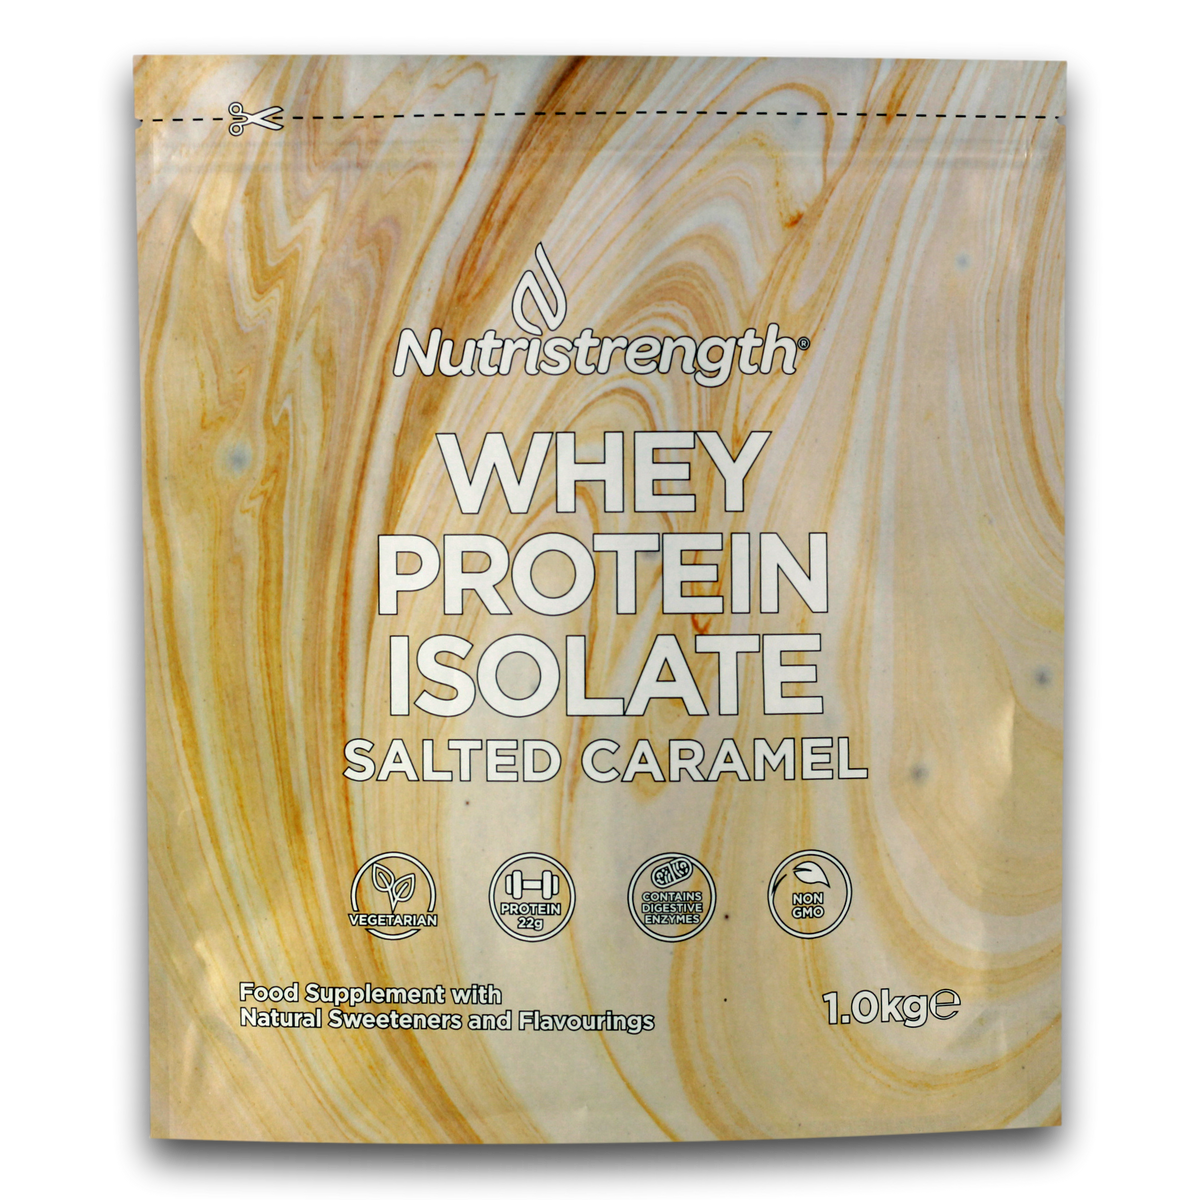 Whey Protein Isolate Salted Caramel